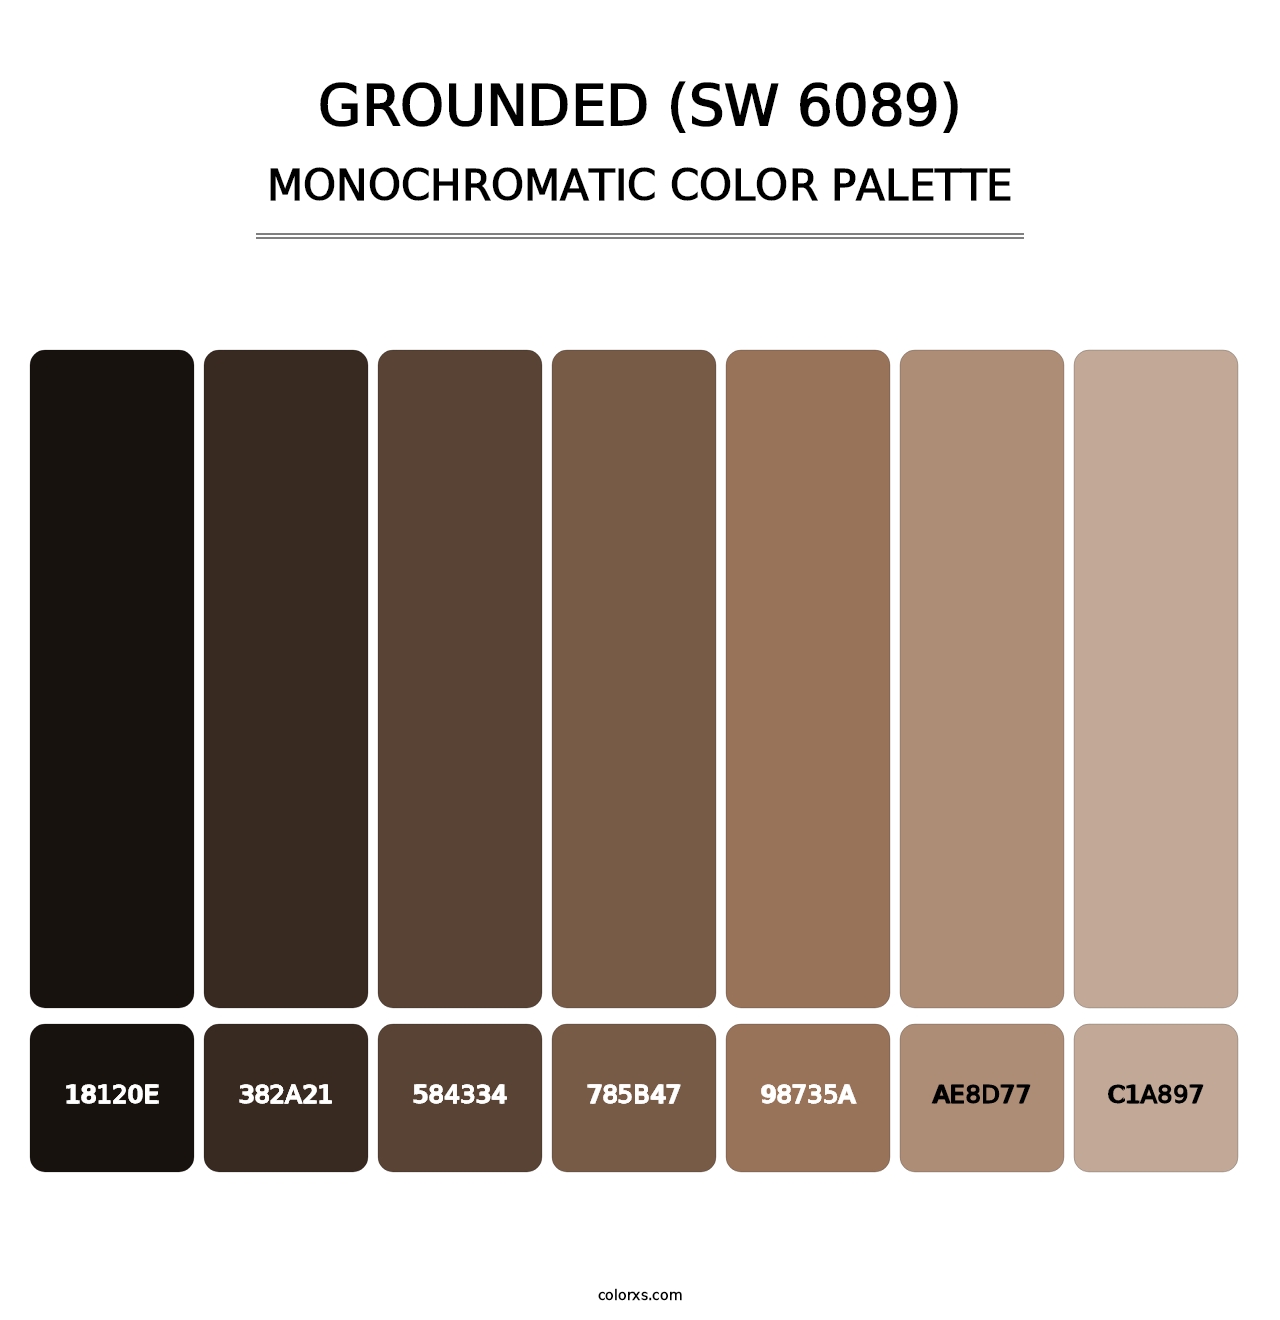 Grounded (SW 6089) - Monochromatic Color Palette